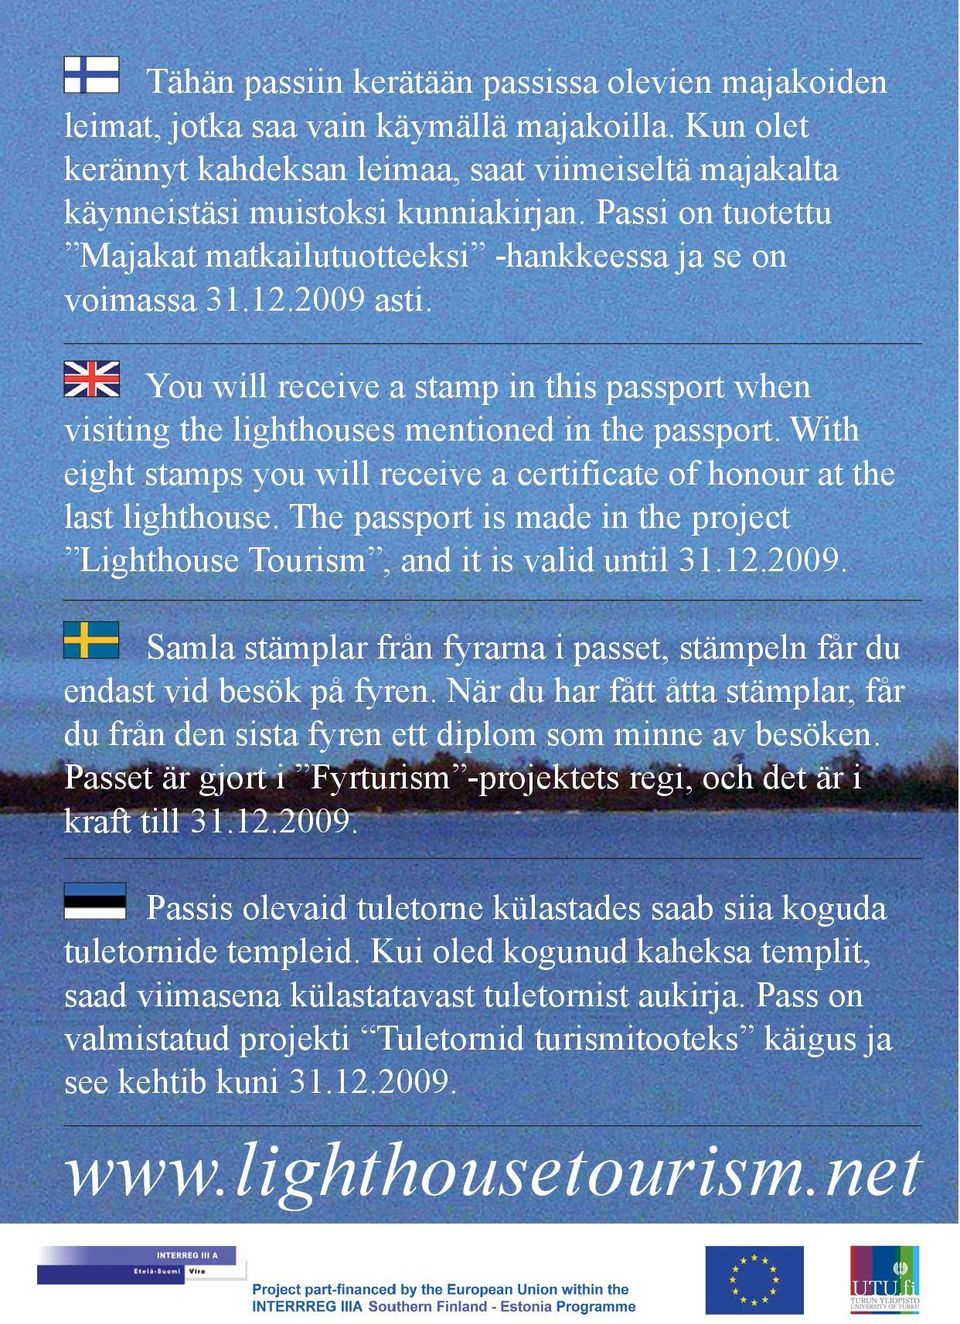 With eight s you will receive a certificate of honour at the last lighthouse. The passport is made in the project Lighthouse Tourism, and it is valid until 31.12.2009.